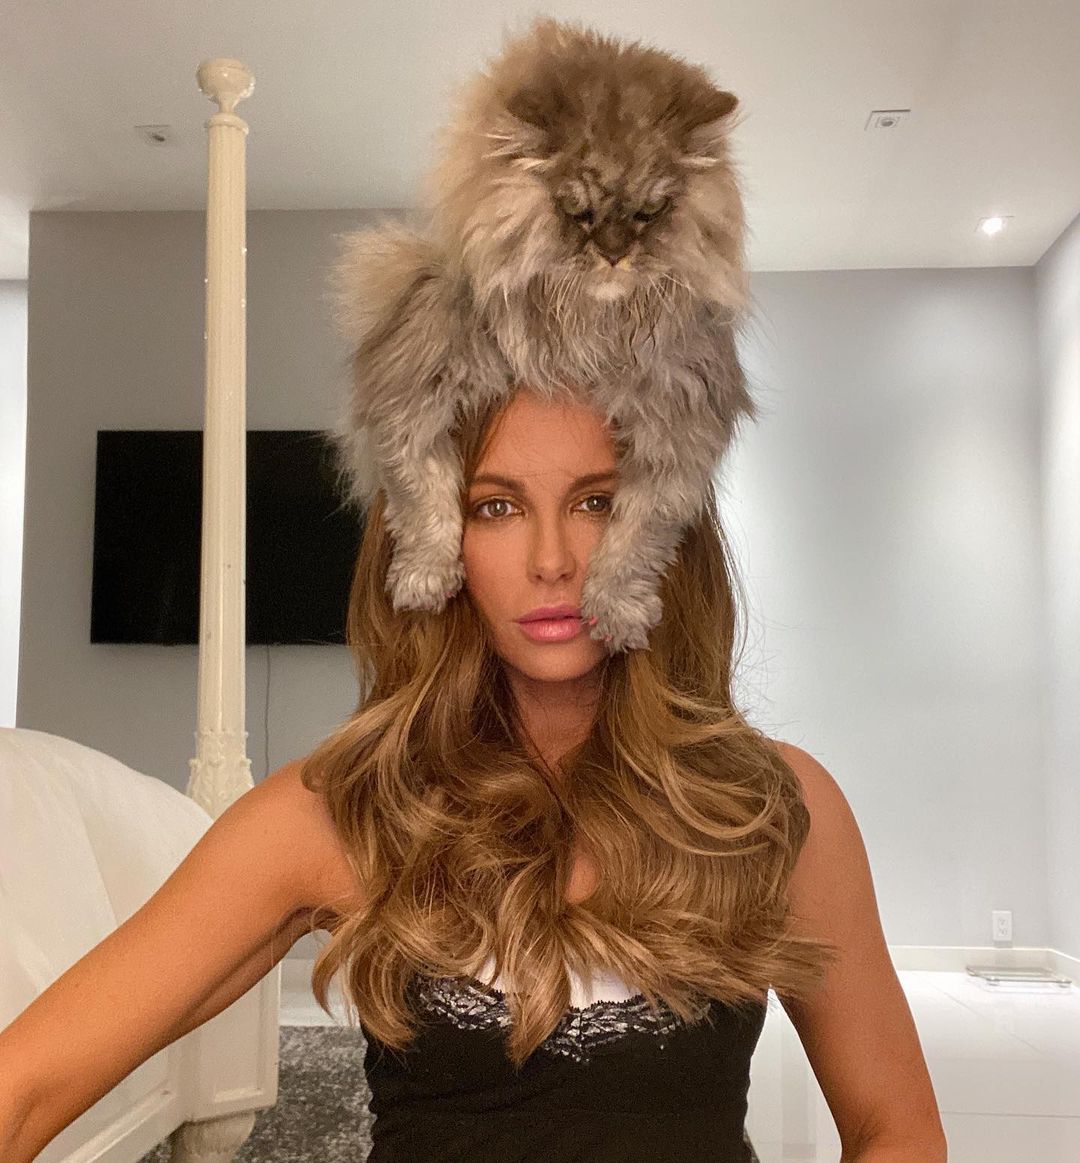 Kate Beckinsale’s New Hat is Pretty Epic! - Photo 1